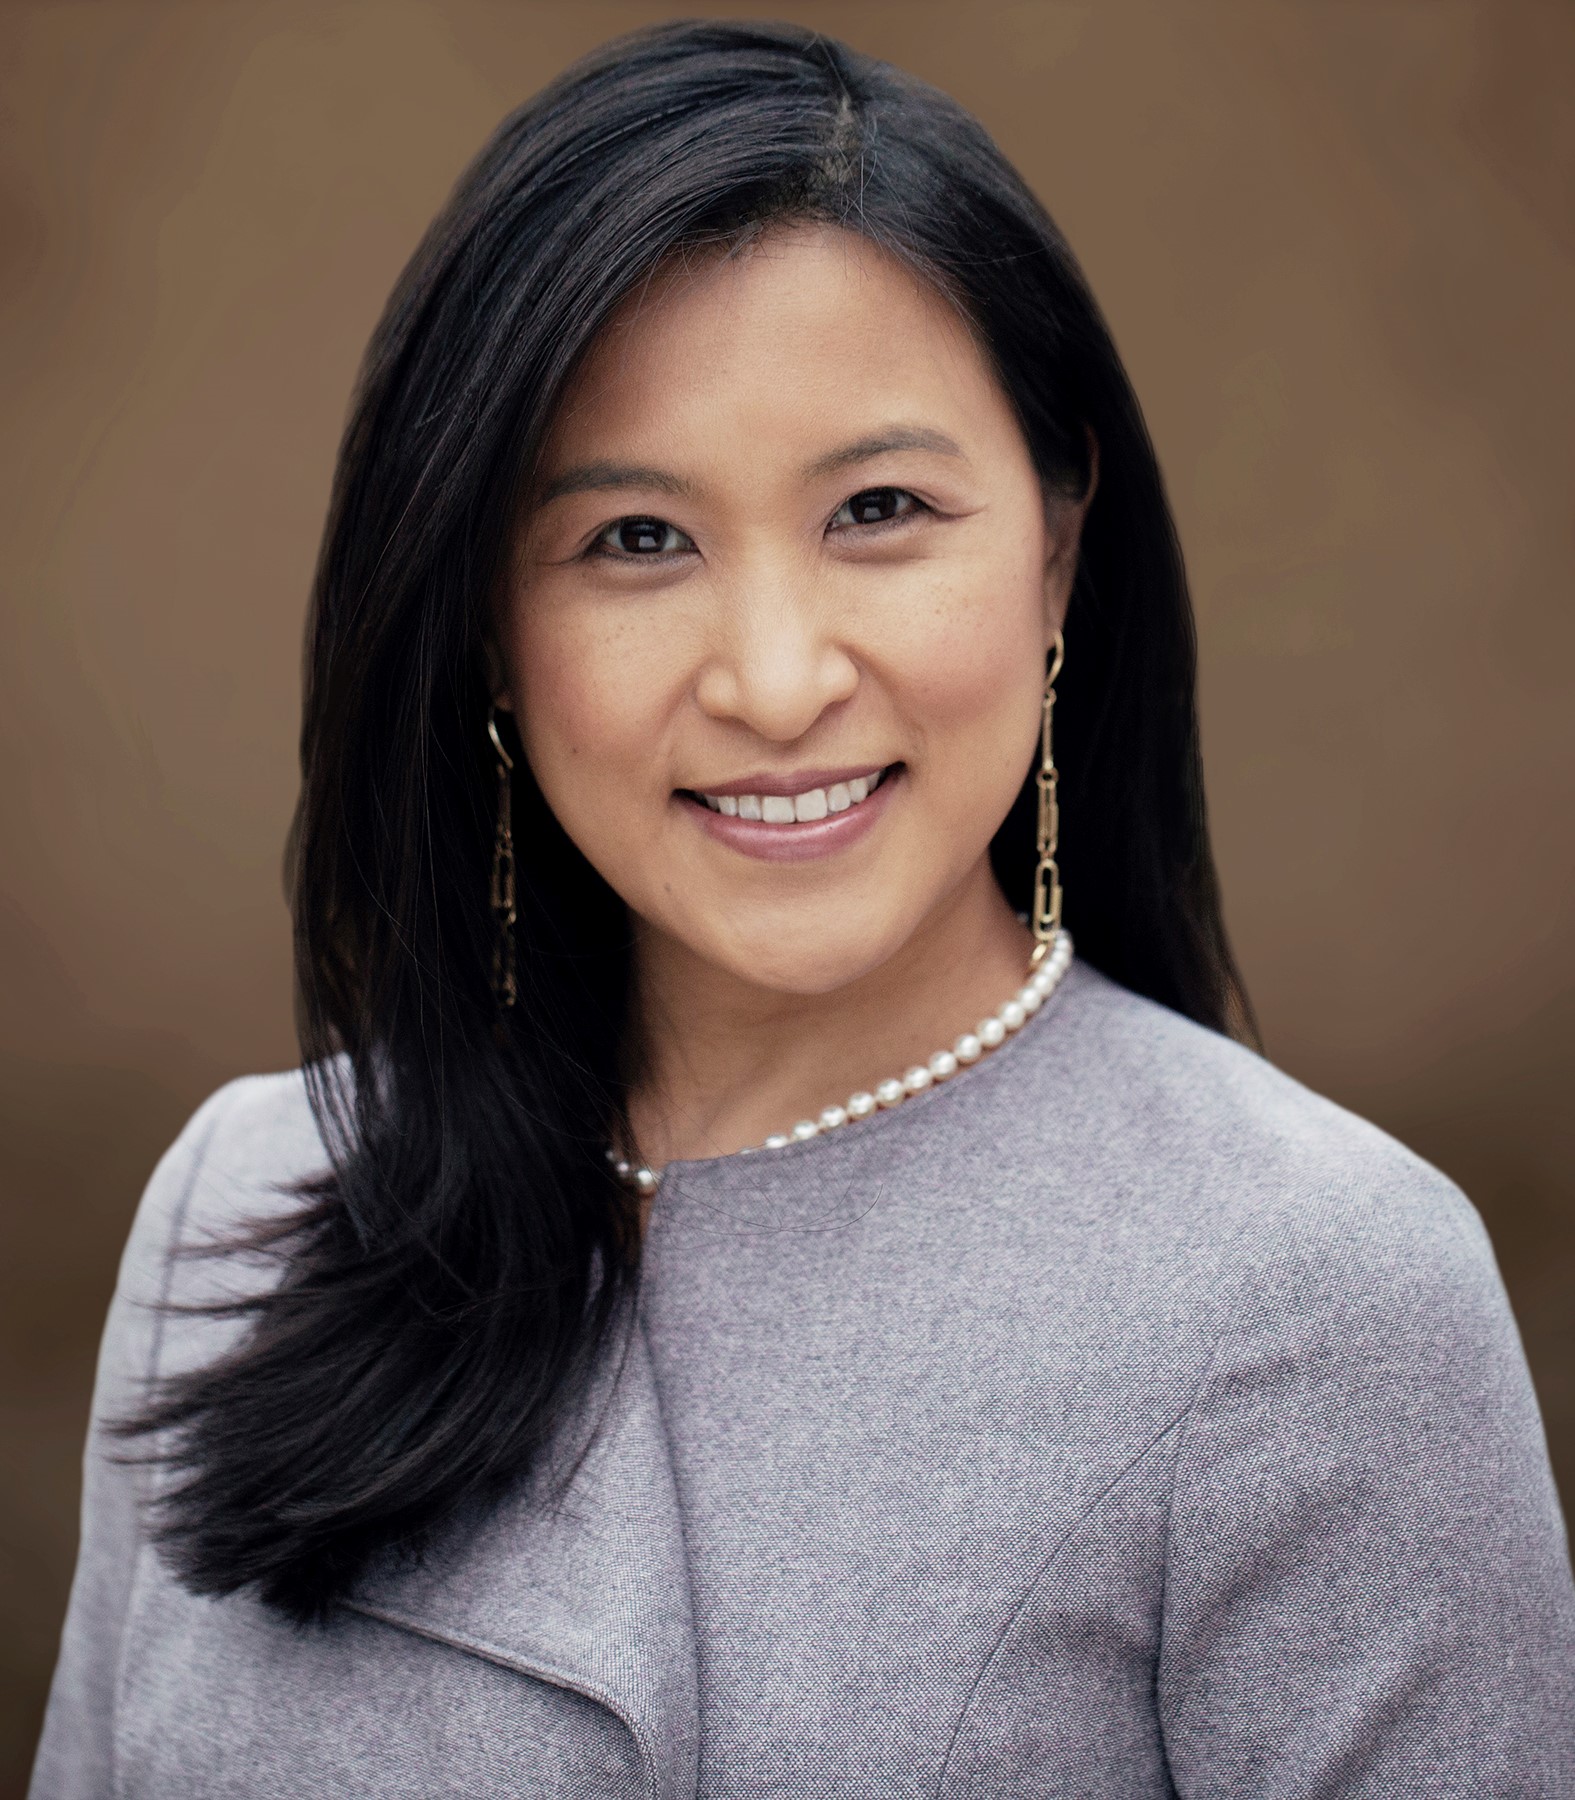 Photograph of Dr. Janice Law